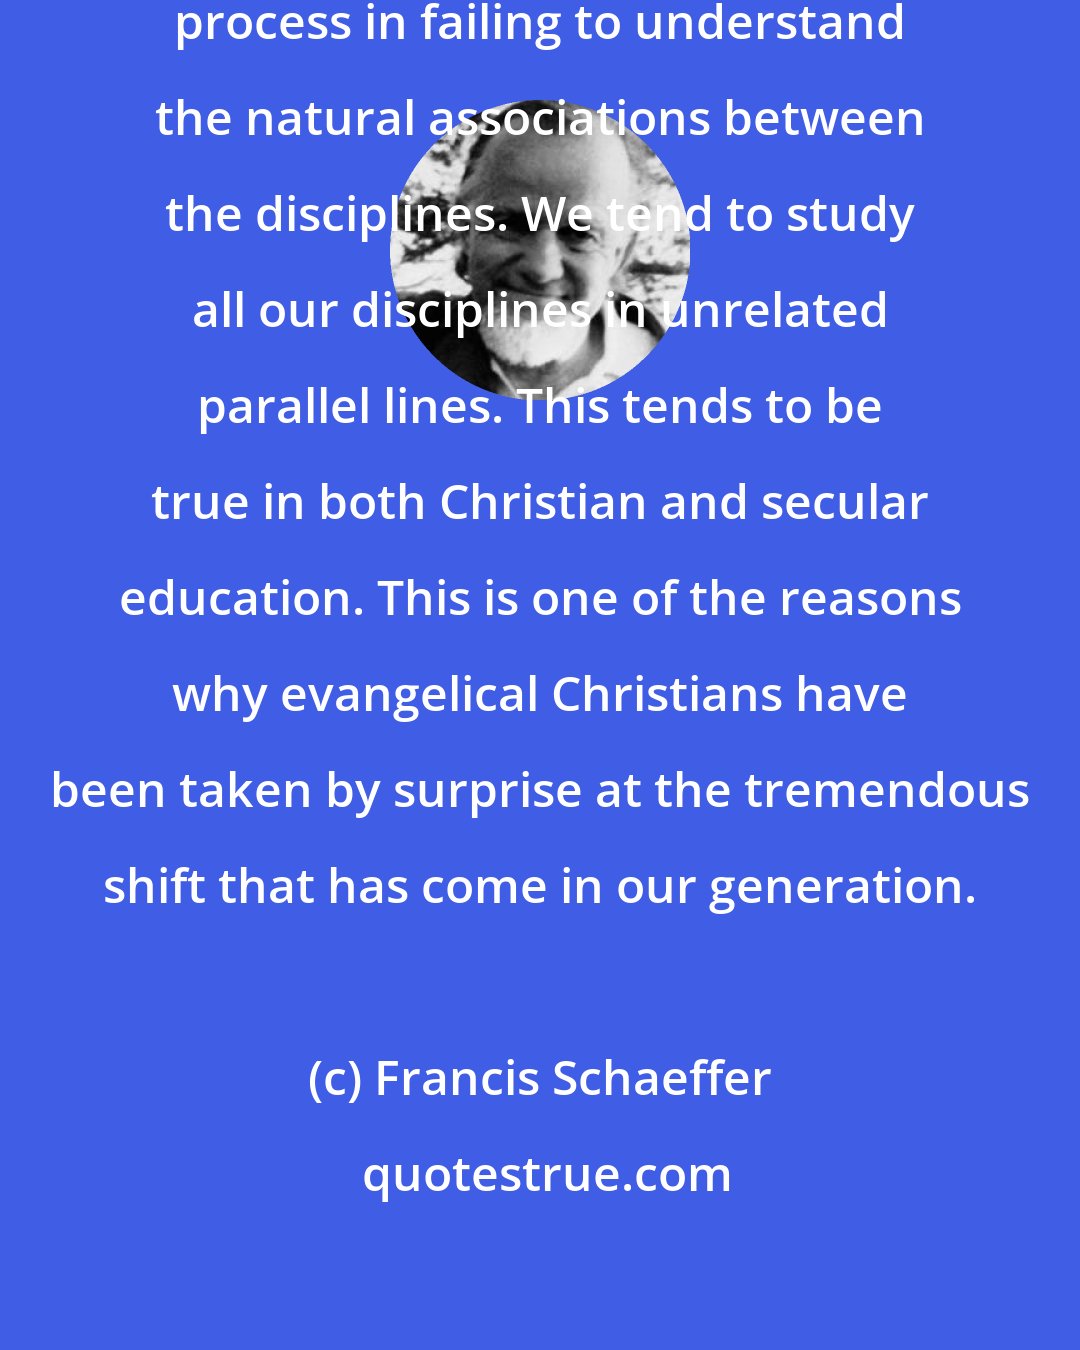 Francis Schaeffer: Today we have a weakness in our education process in failing to understand the natural associations between the disciplines. We tend to study all our disciplines in unrelated parallel lines. This tends to be true in both Christian and secular education. This is one of the reasons why evangelical Christians have been taken by surprise at the tremendous shift that has come in our generation.